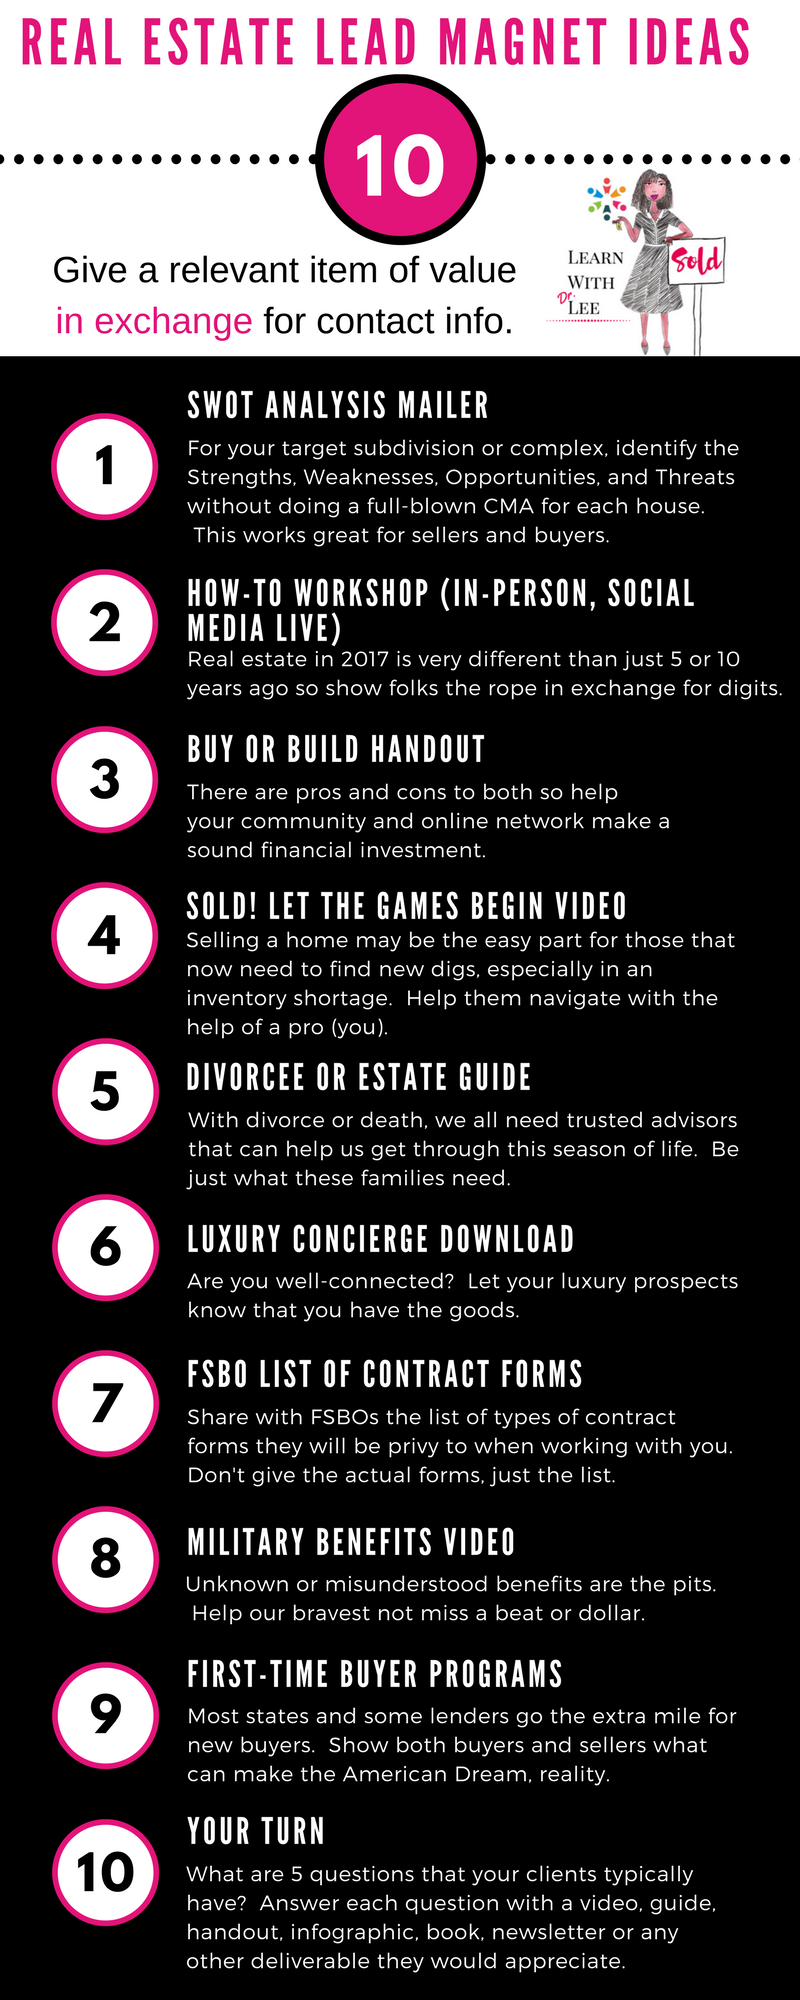 Infographic of Real Estate Items of Value